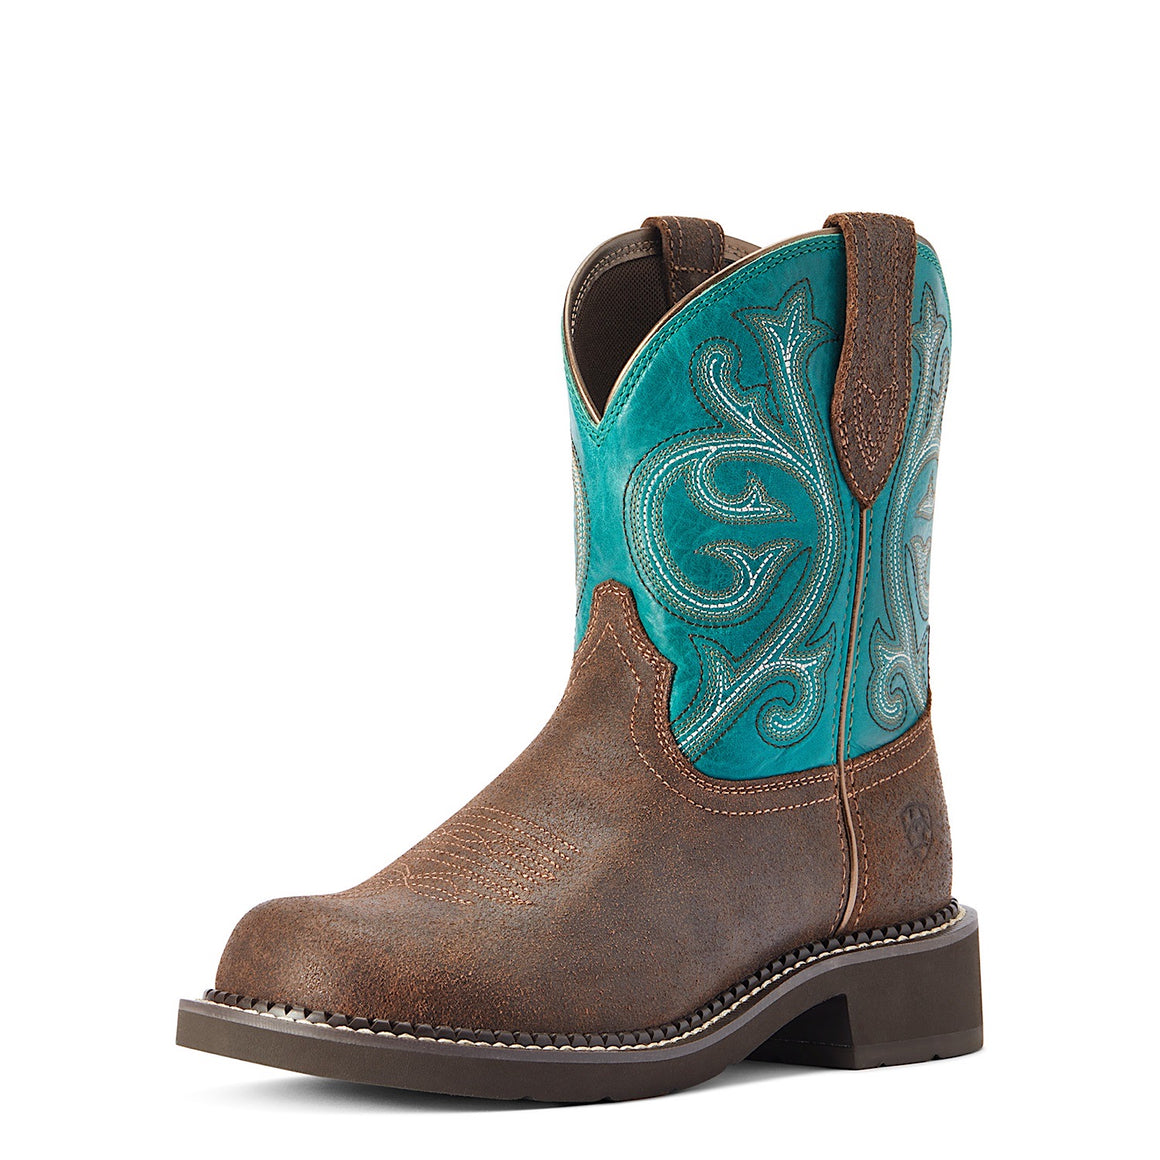 Buy Women's Ariat Western Boots | Heritage Roper & More Styles - The ...